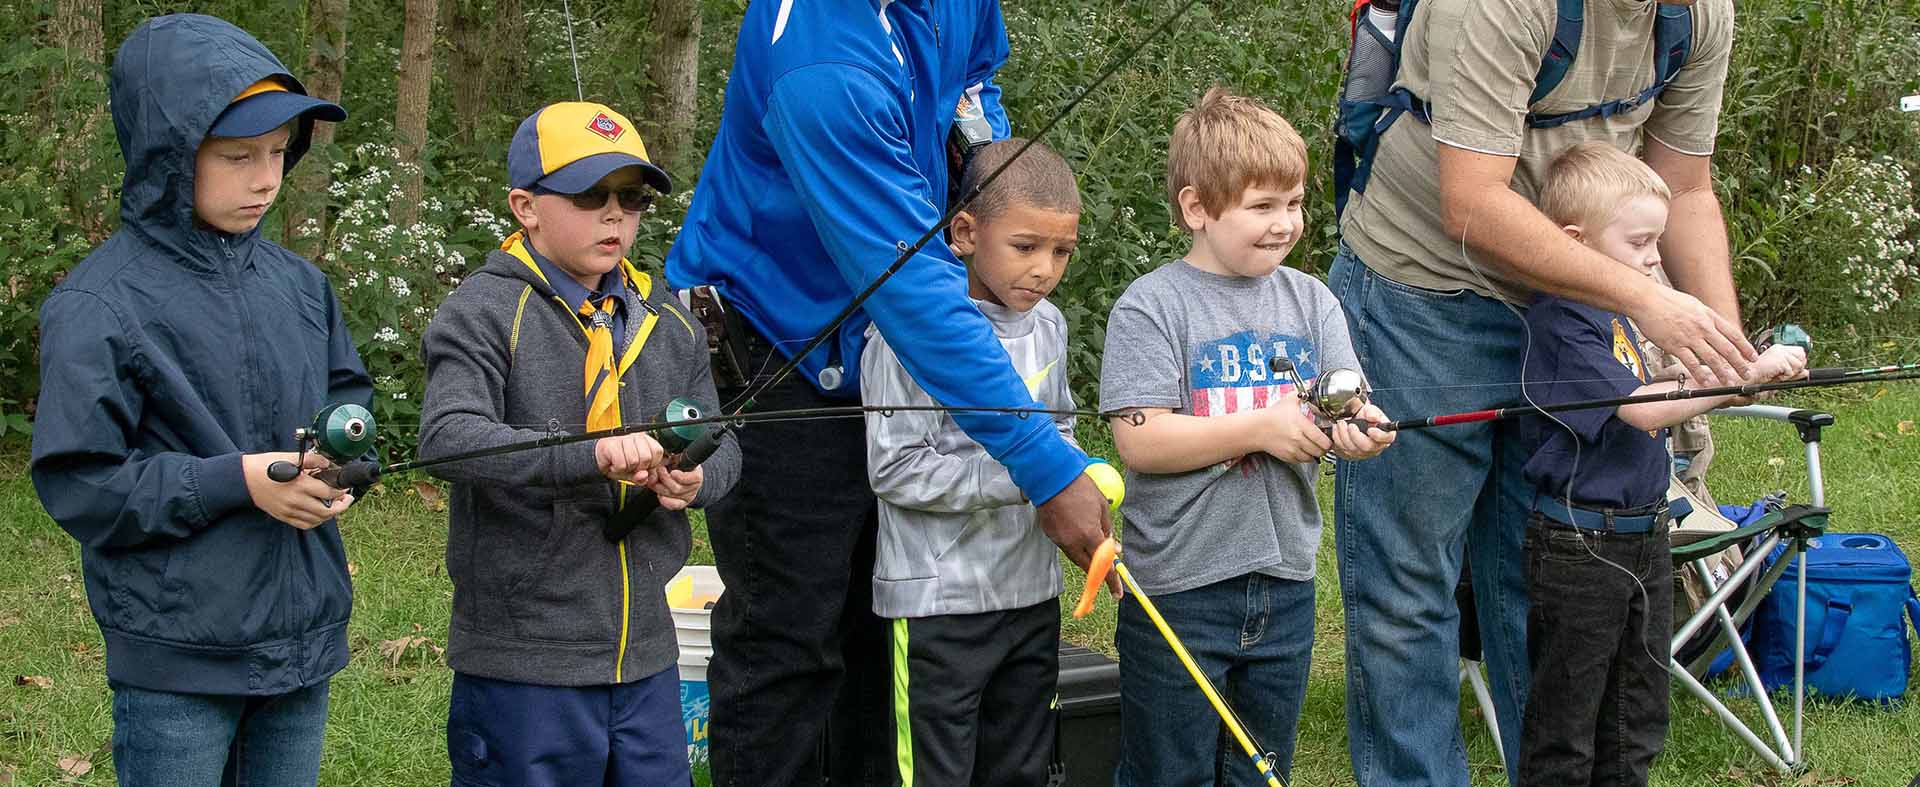 Scouts Fishing at Cub Launch